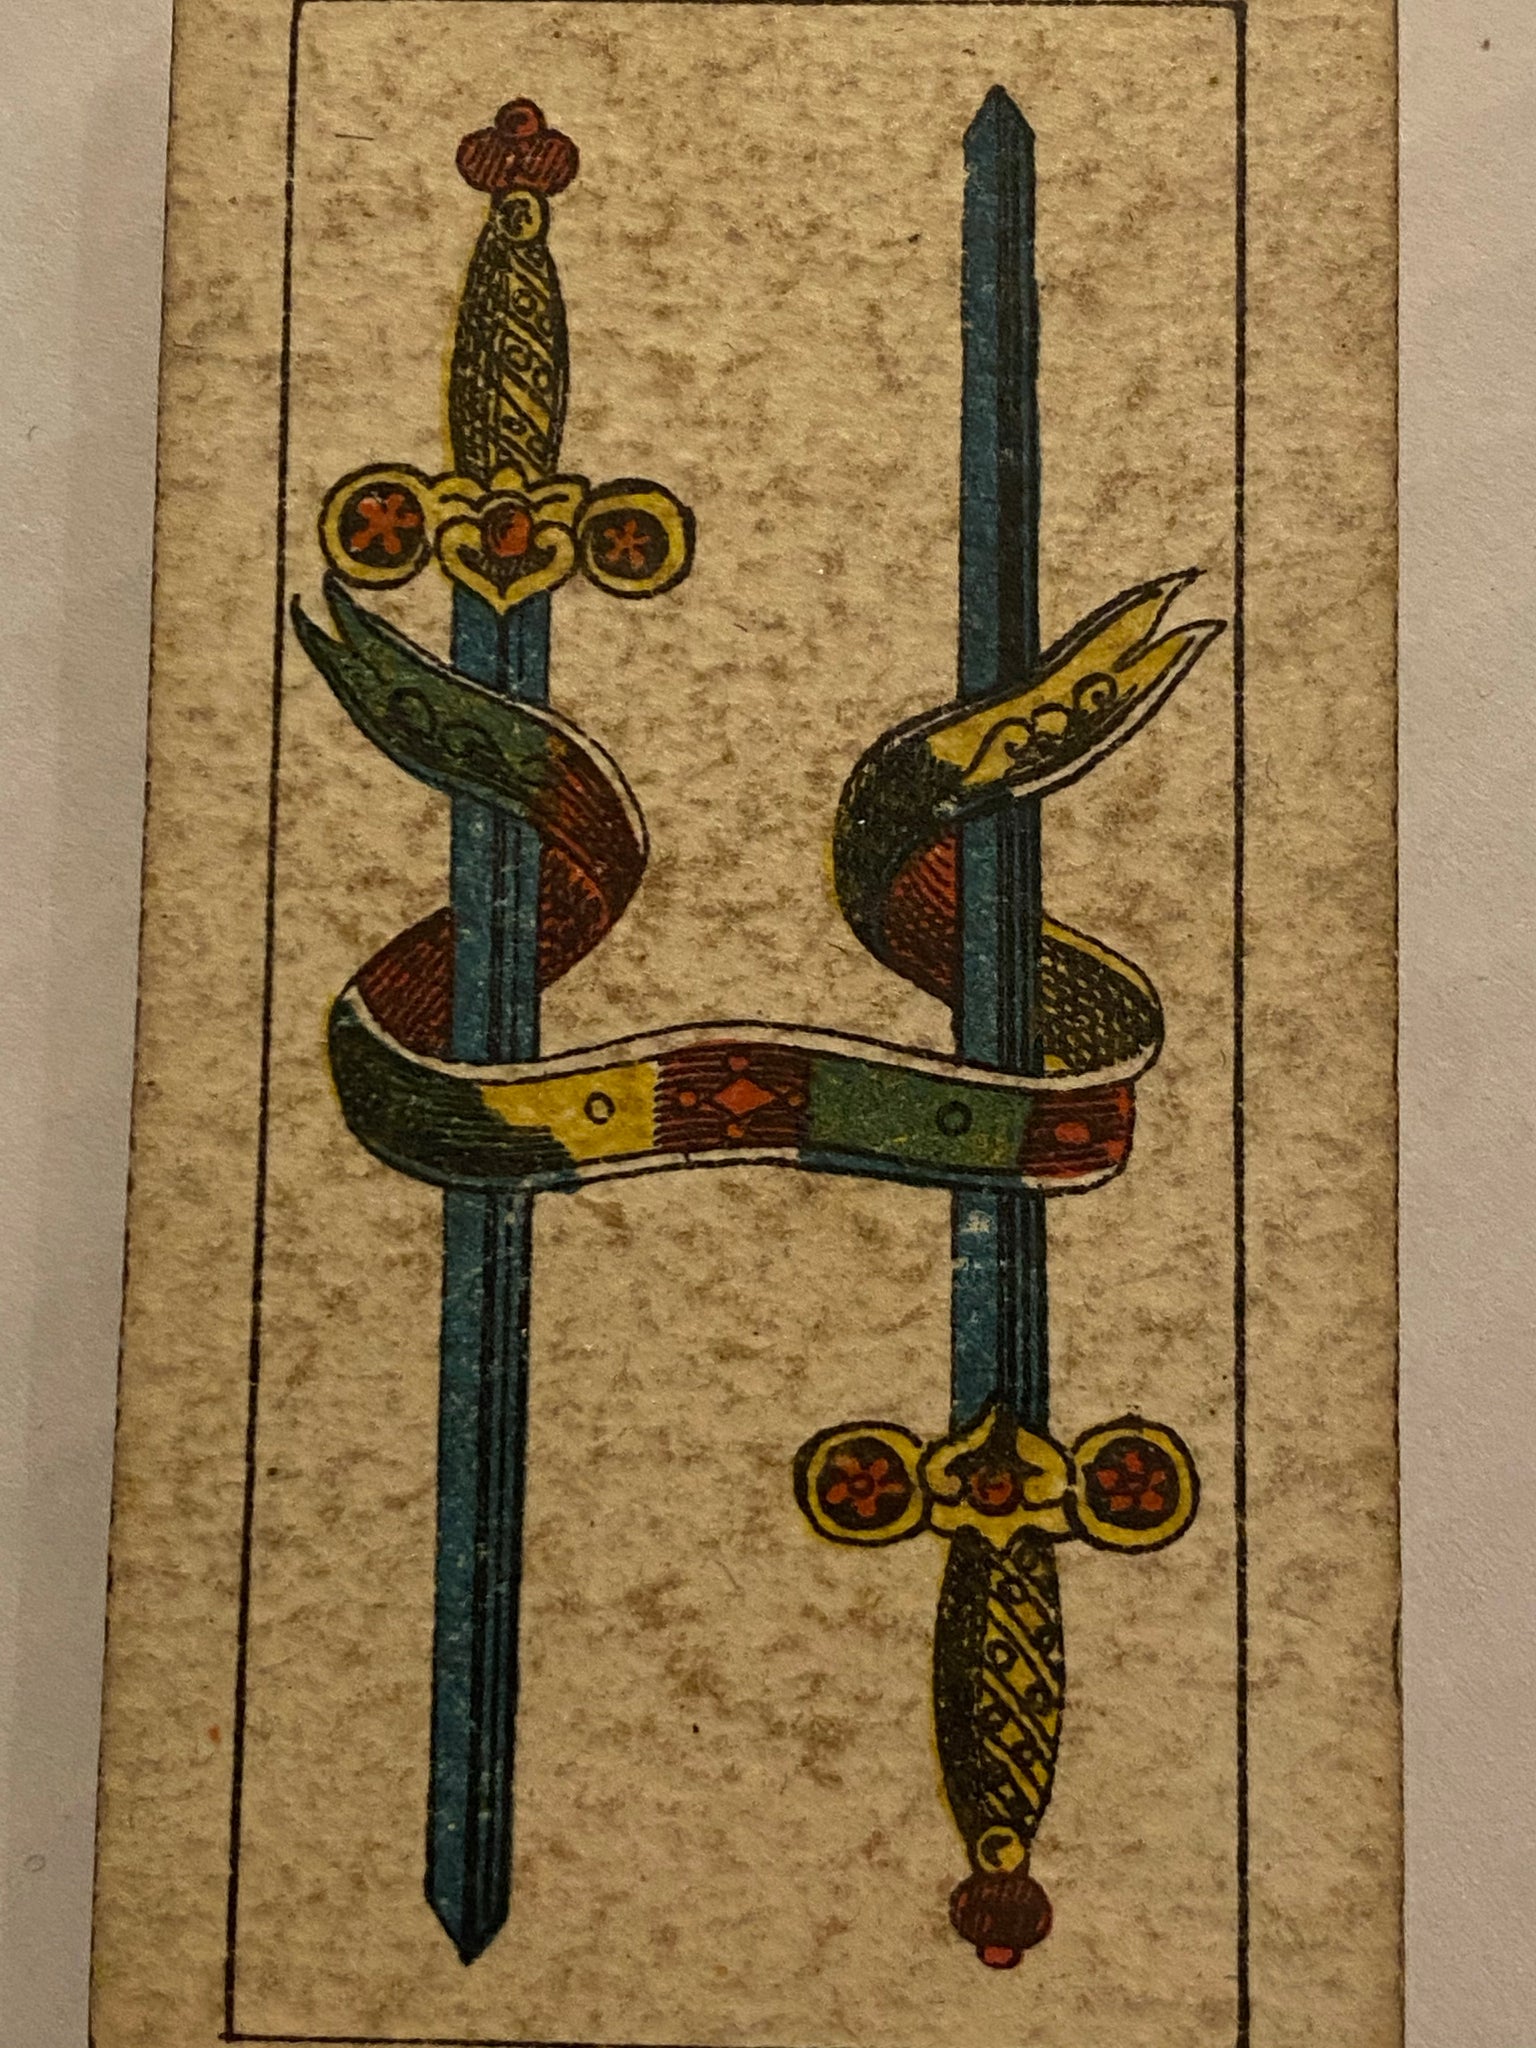 Two of Swords - Wikipedia